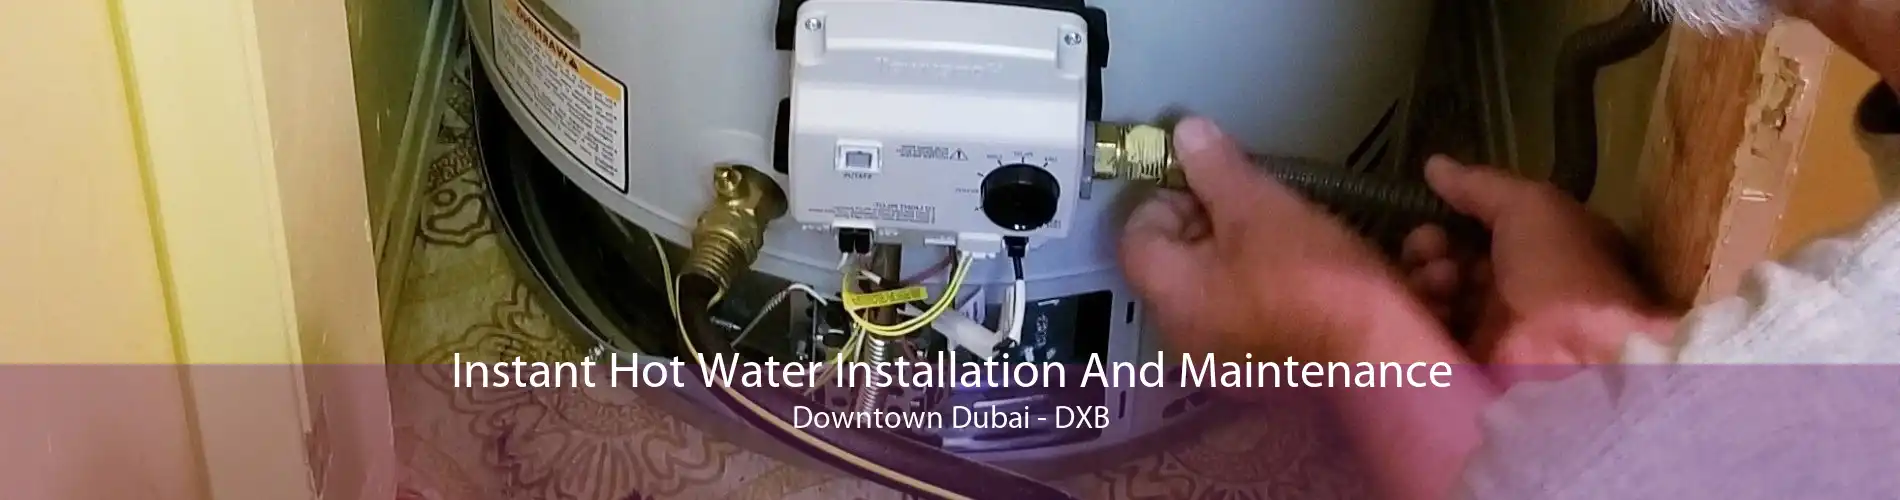 Instant Hot Water Installation And Maintenance Downtown Dubai - DXB